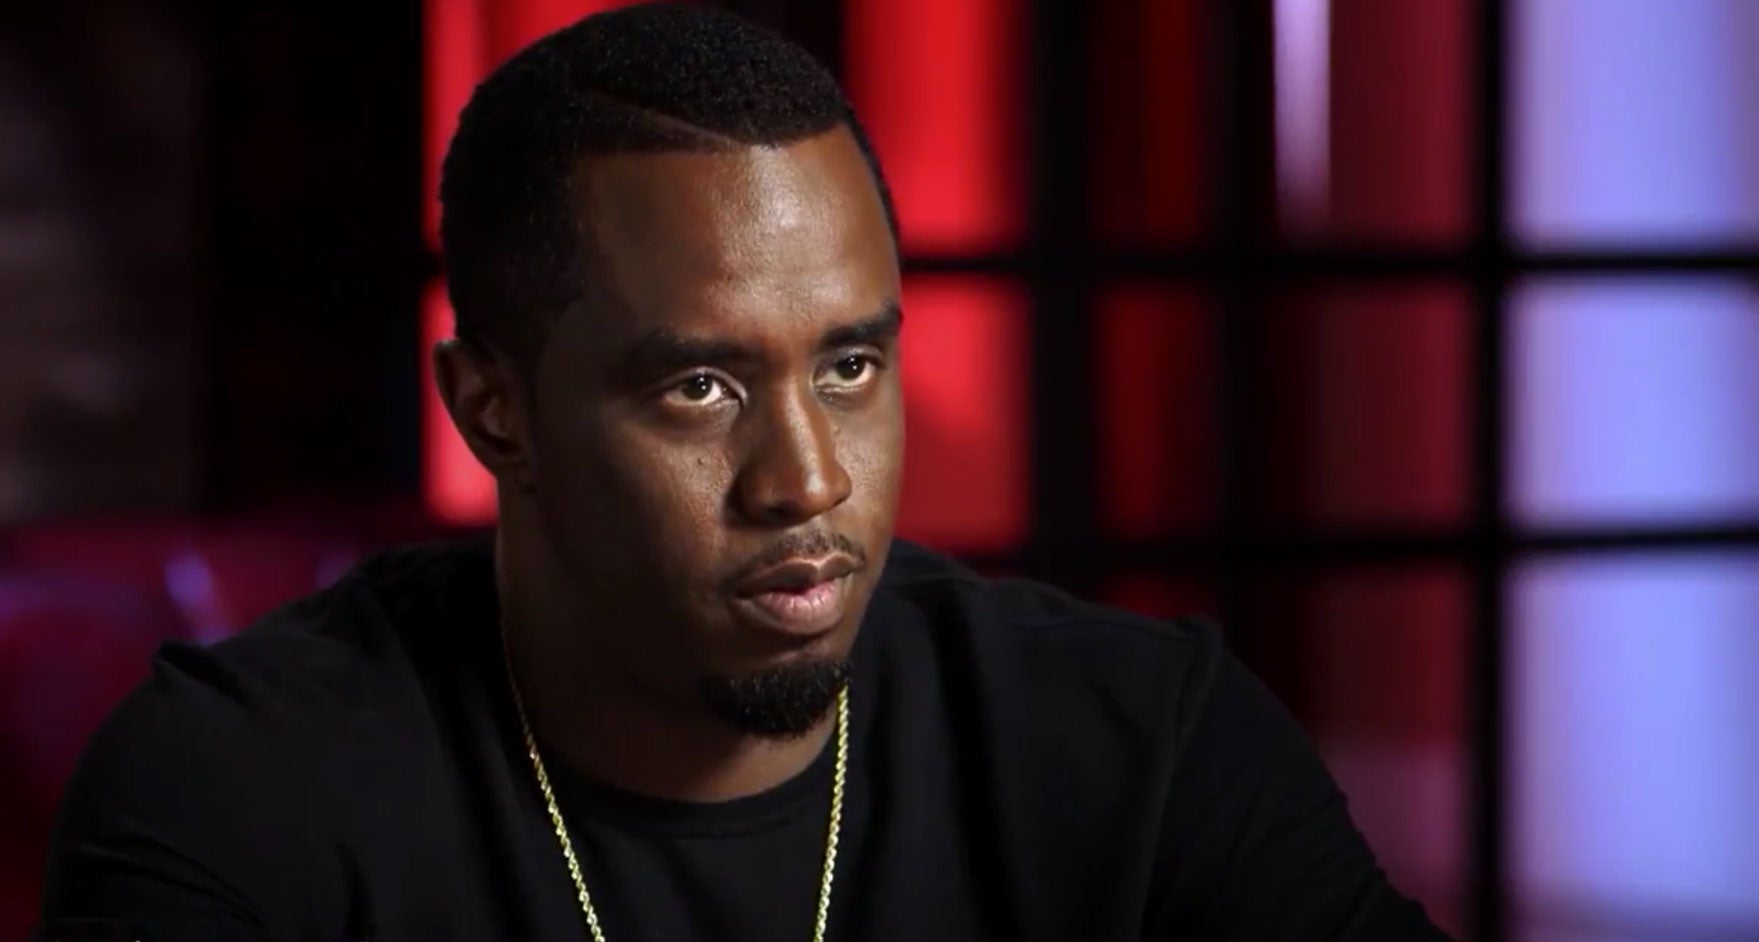 Must-See: Diddy Discovers An Ancestor Who Was Never Enslaved in ‘Finding Your Roots’